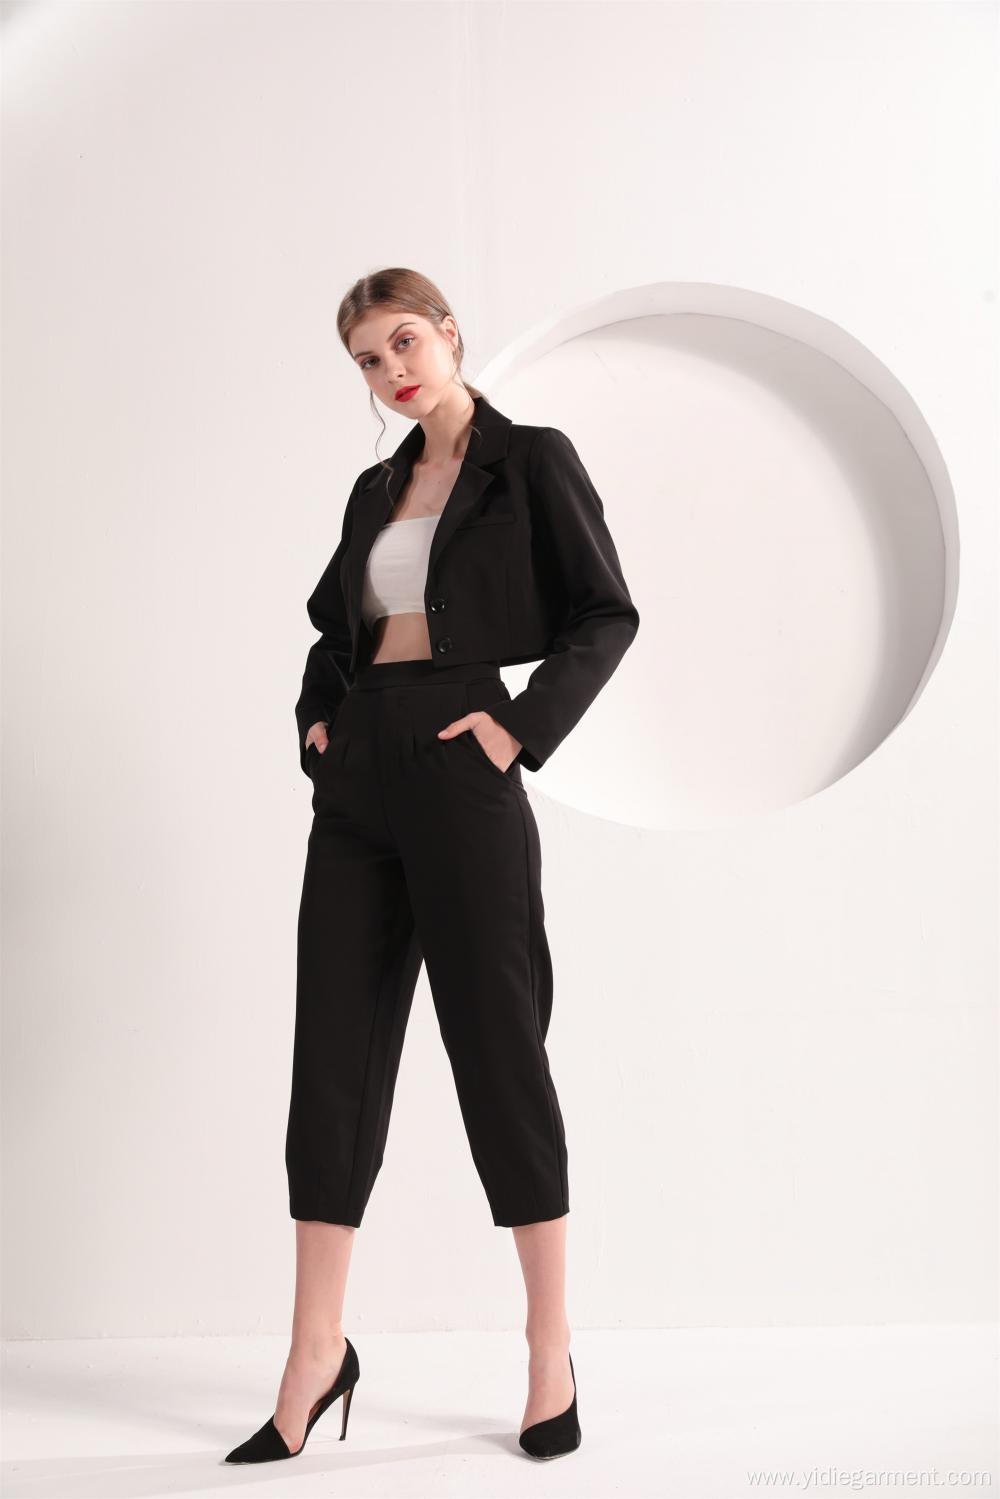 Ladies' Black Color Cropped Blazer and Trousers